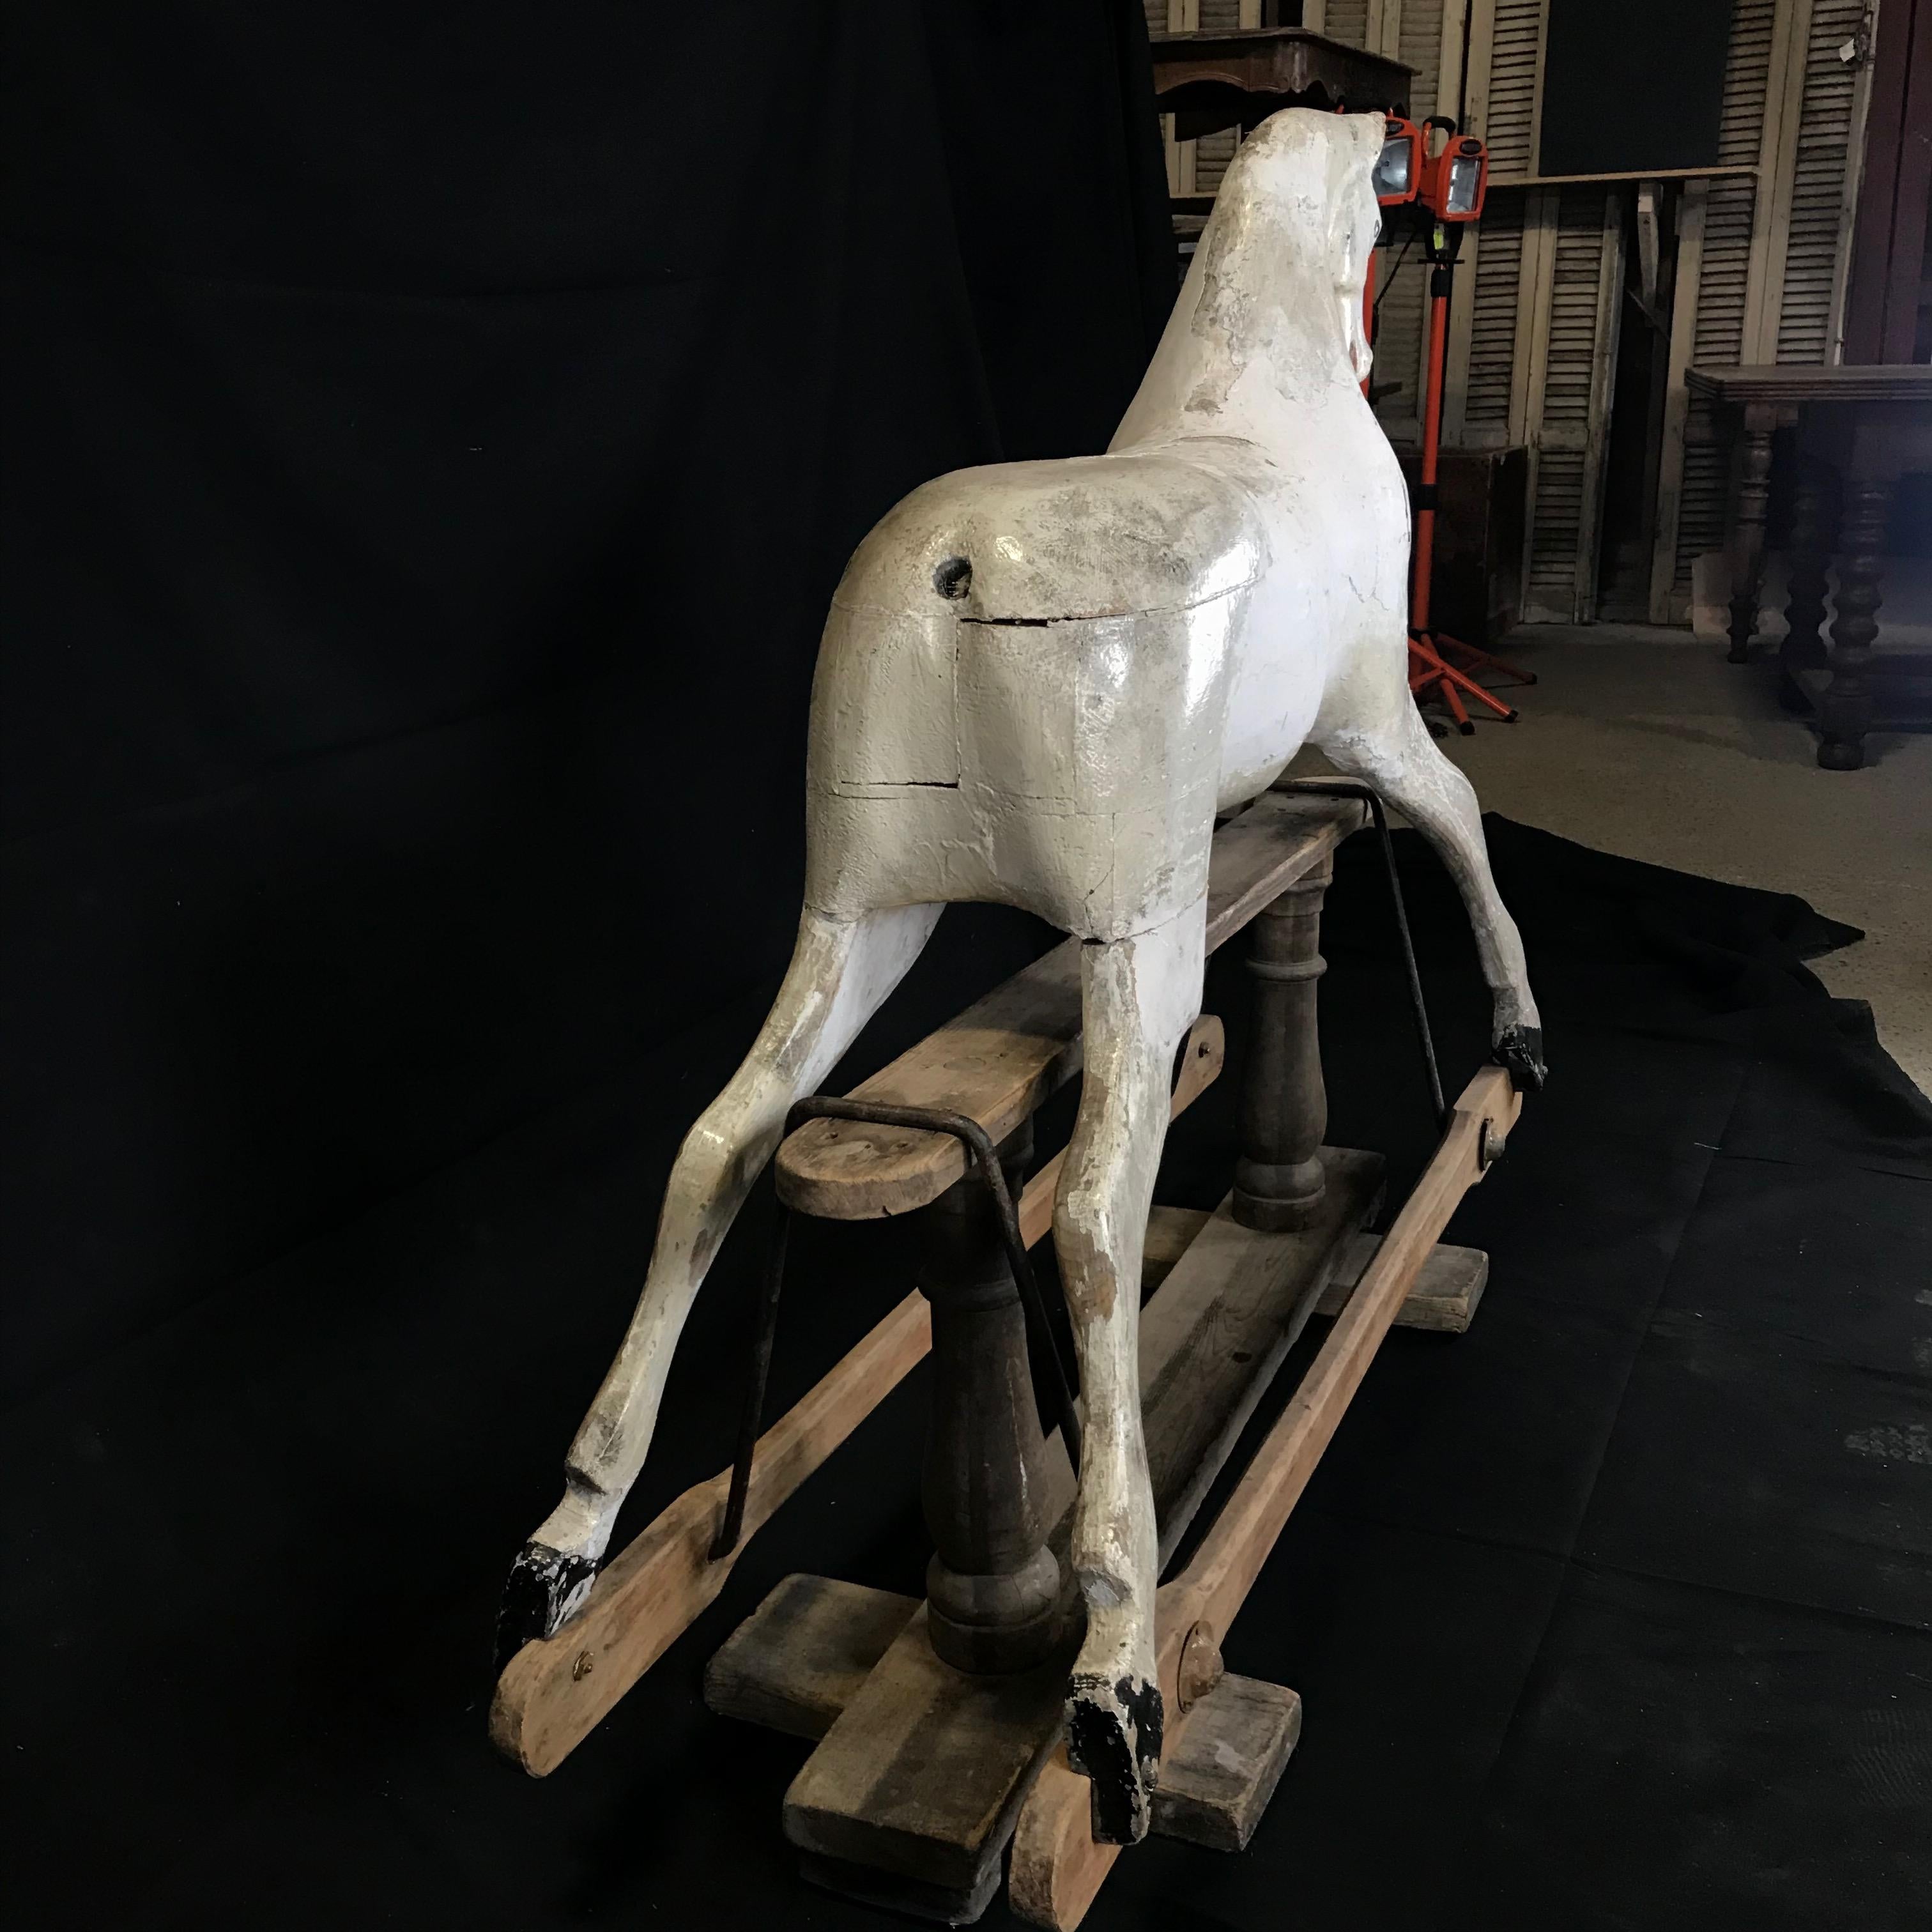 Beautiful early British carousel horse with a stunning whitewashed patina and glass eyes resting on a wooden pedestal support. A sculptural piece of art and eye catching Folk Art focal point. Weathered, small losses and old repairs add to its